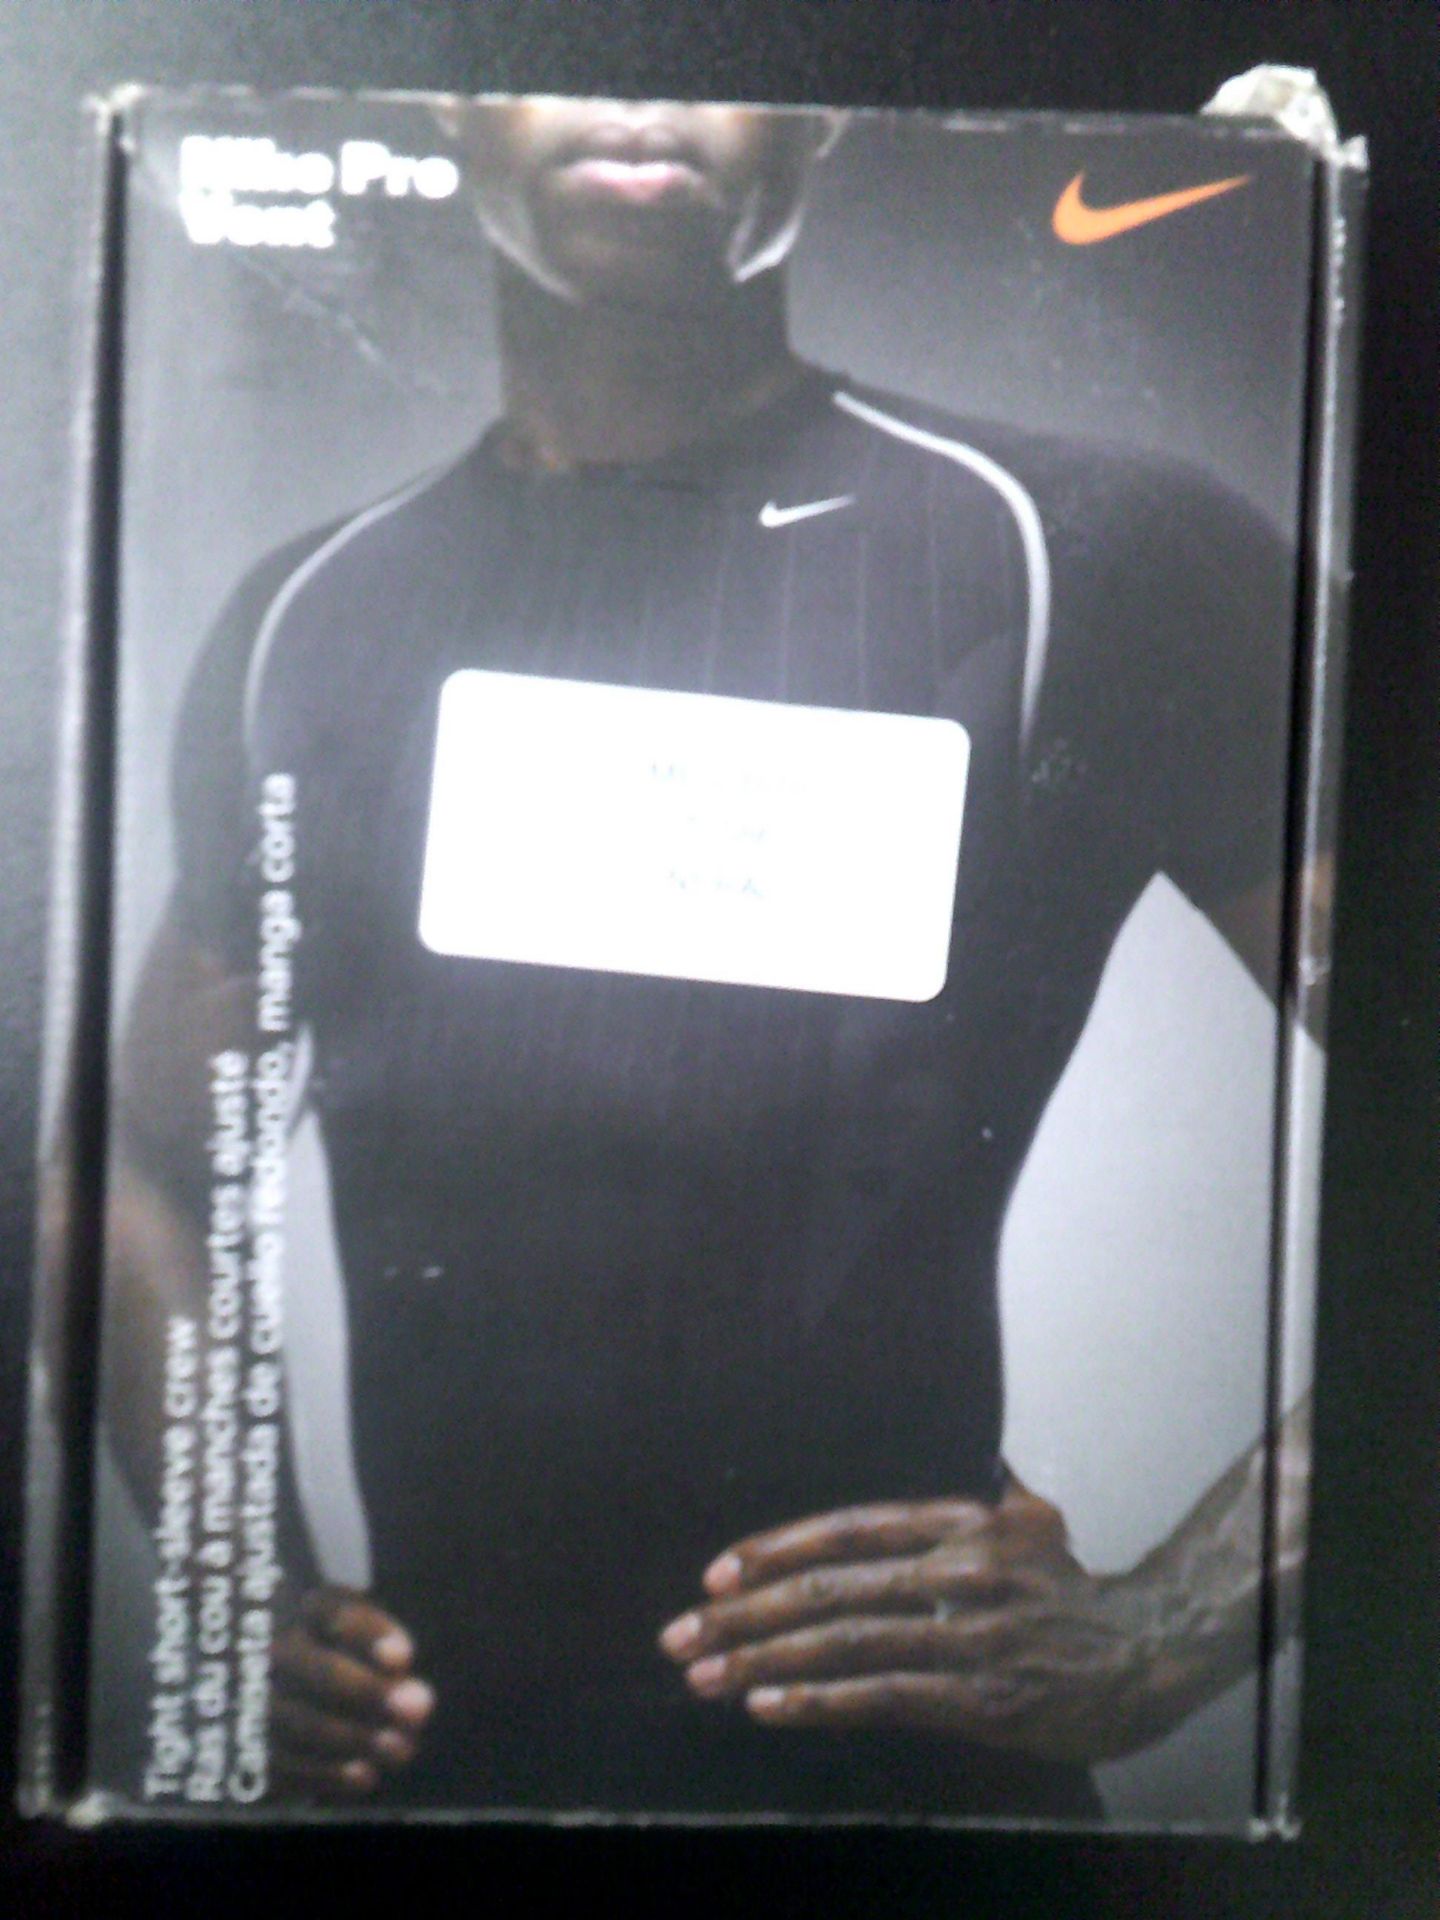 Nike Pro Vent Tight Sleeve T Shirt (Delivery Band A)